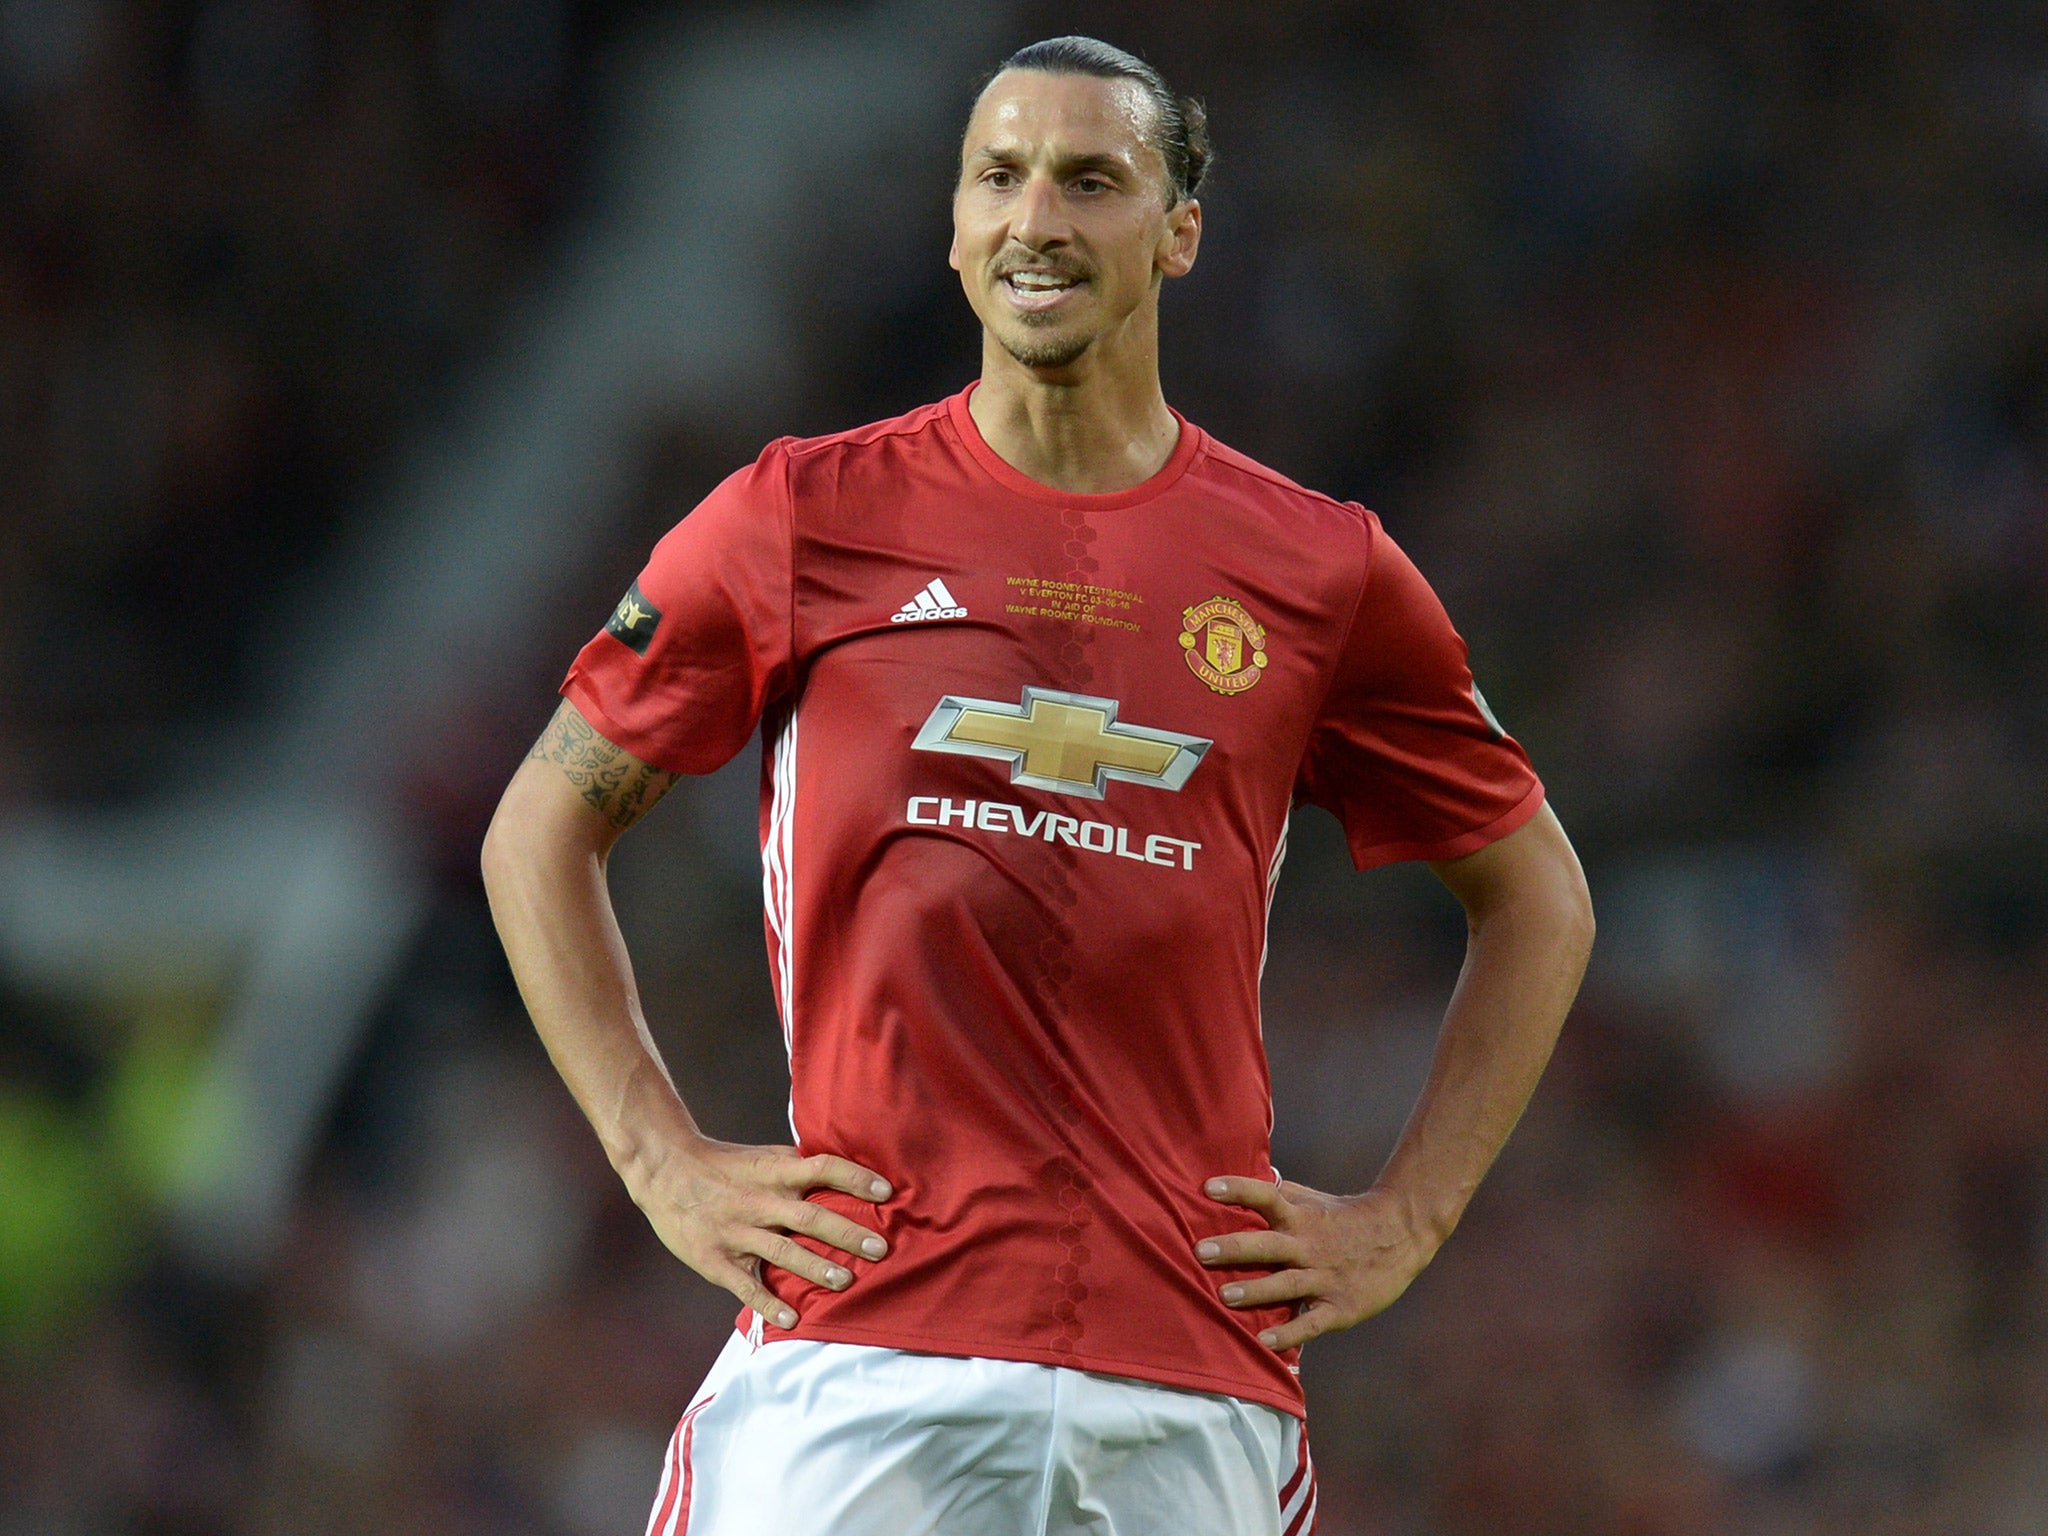 Zlatan Ibrahimovic will lead Manchester United's attack this season